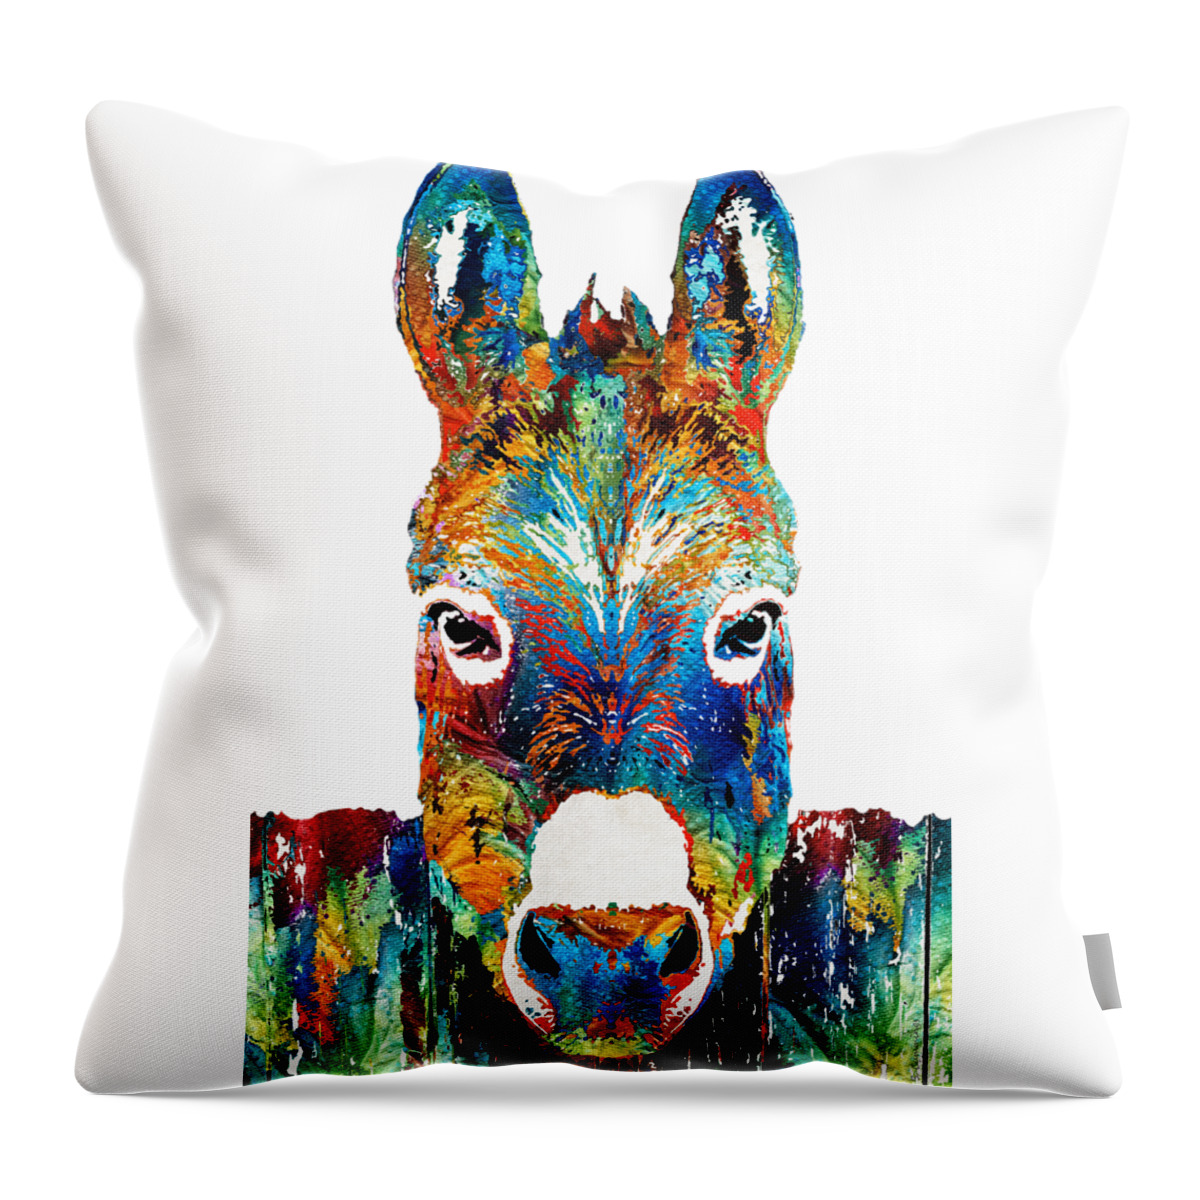 Donkey Throw Pillow featuring the painting Colorful Donkey Art - Mr. Personality - By Sharon Cummings by Sharon Cummings